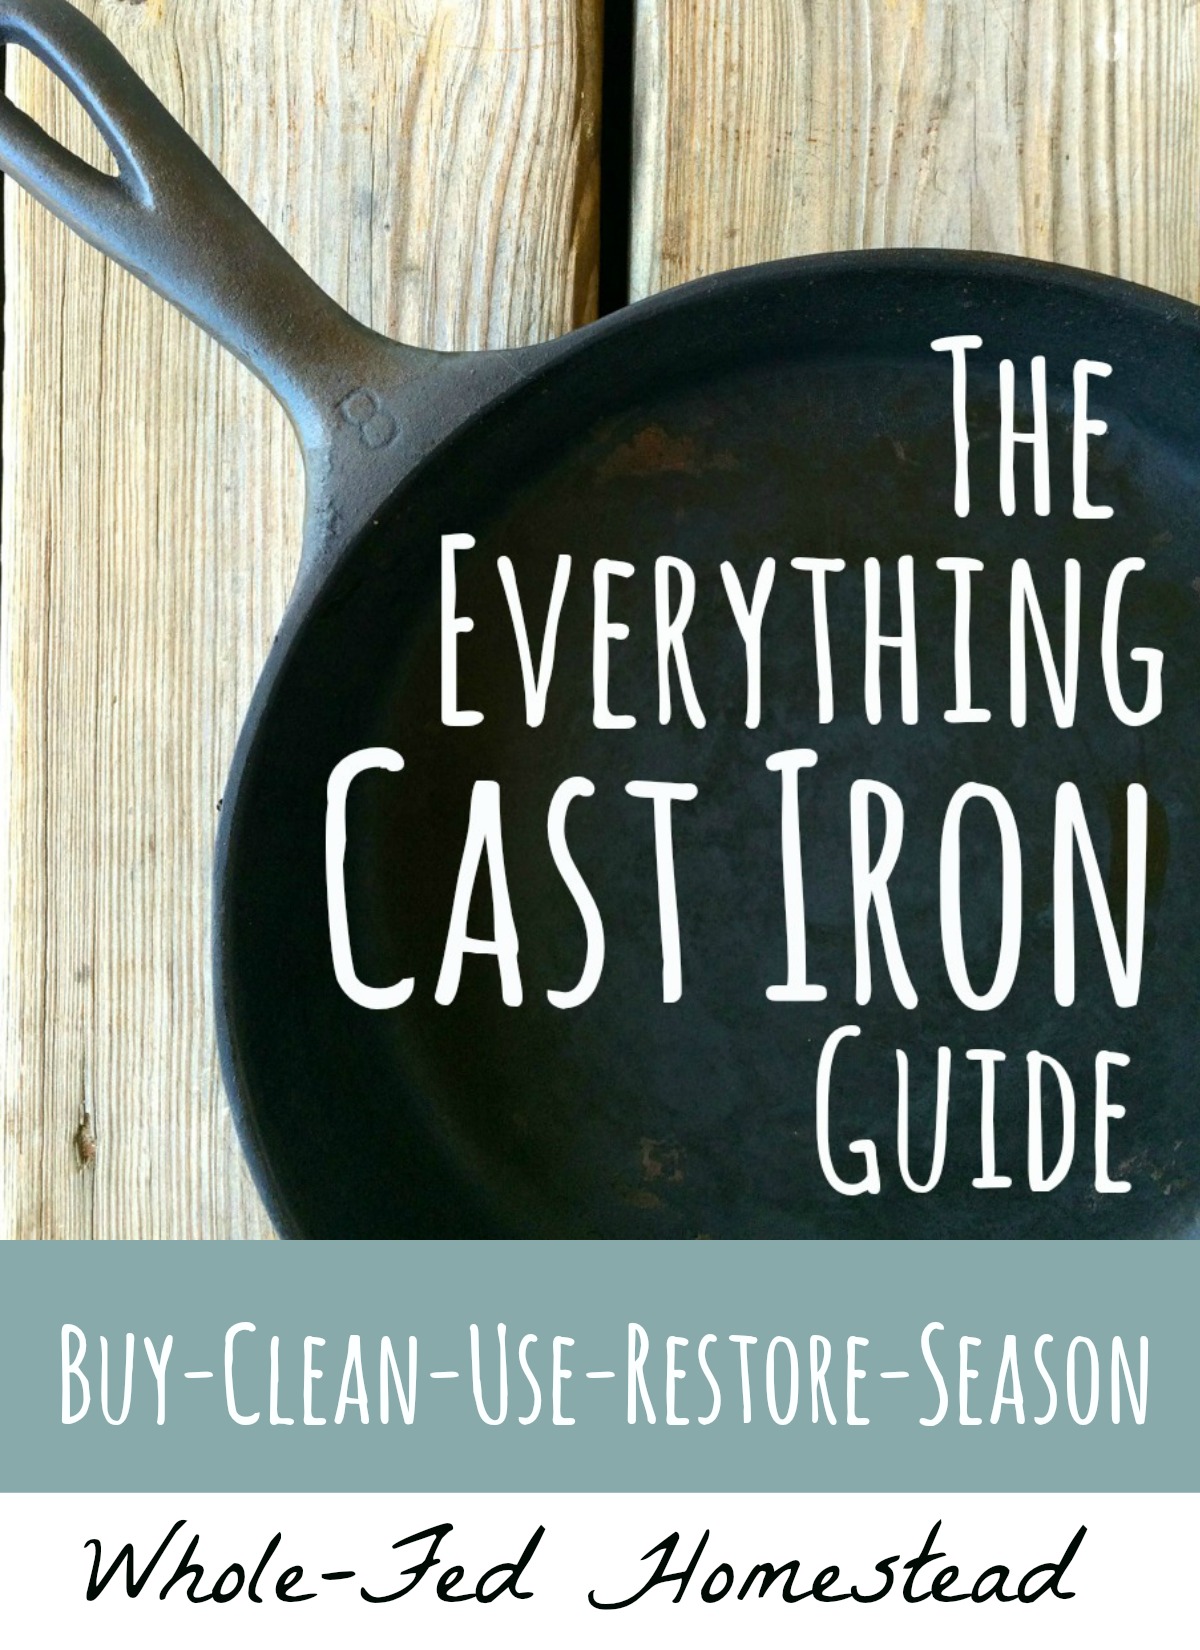 The Everything Cast Iron Guide Feature